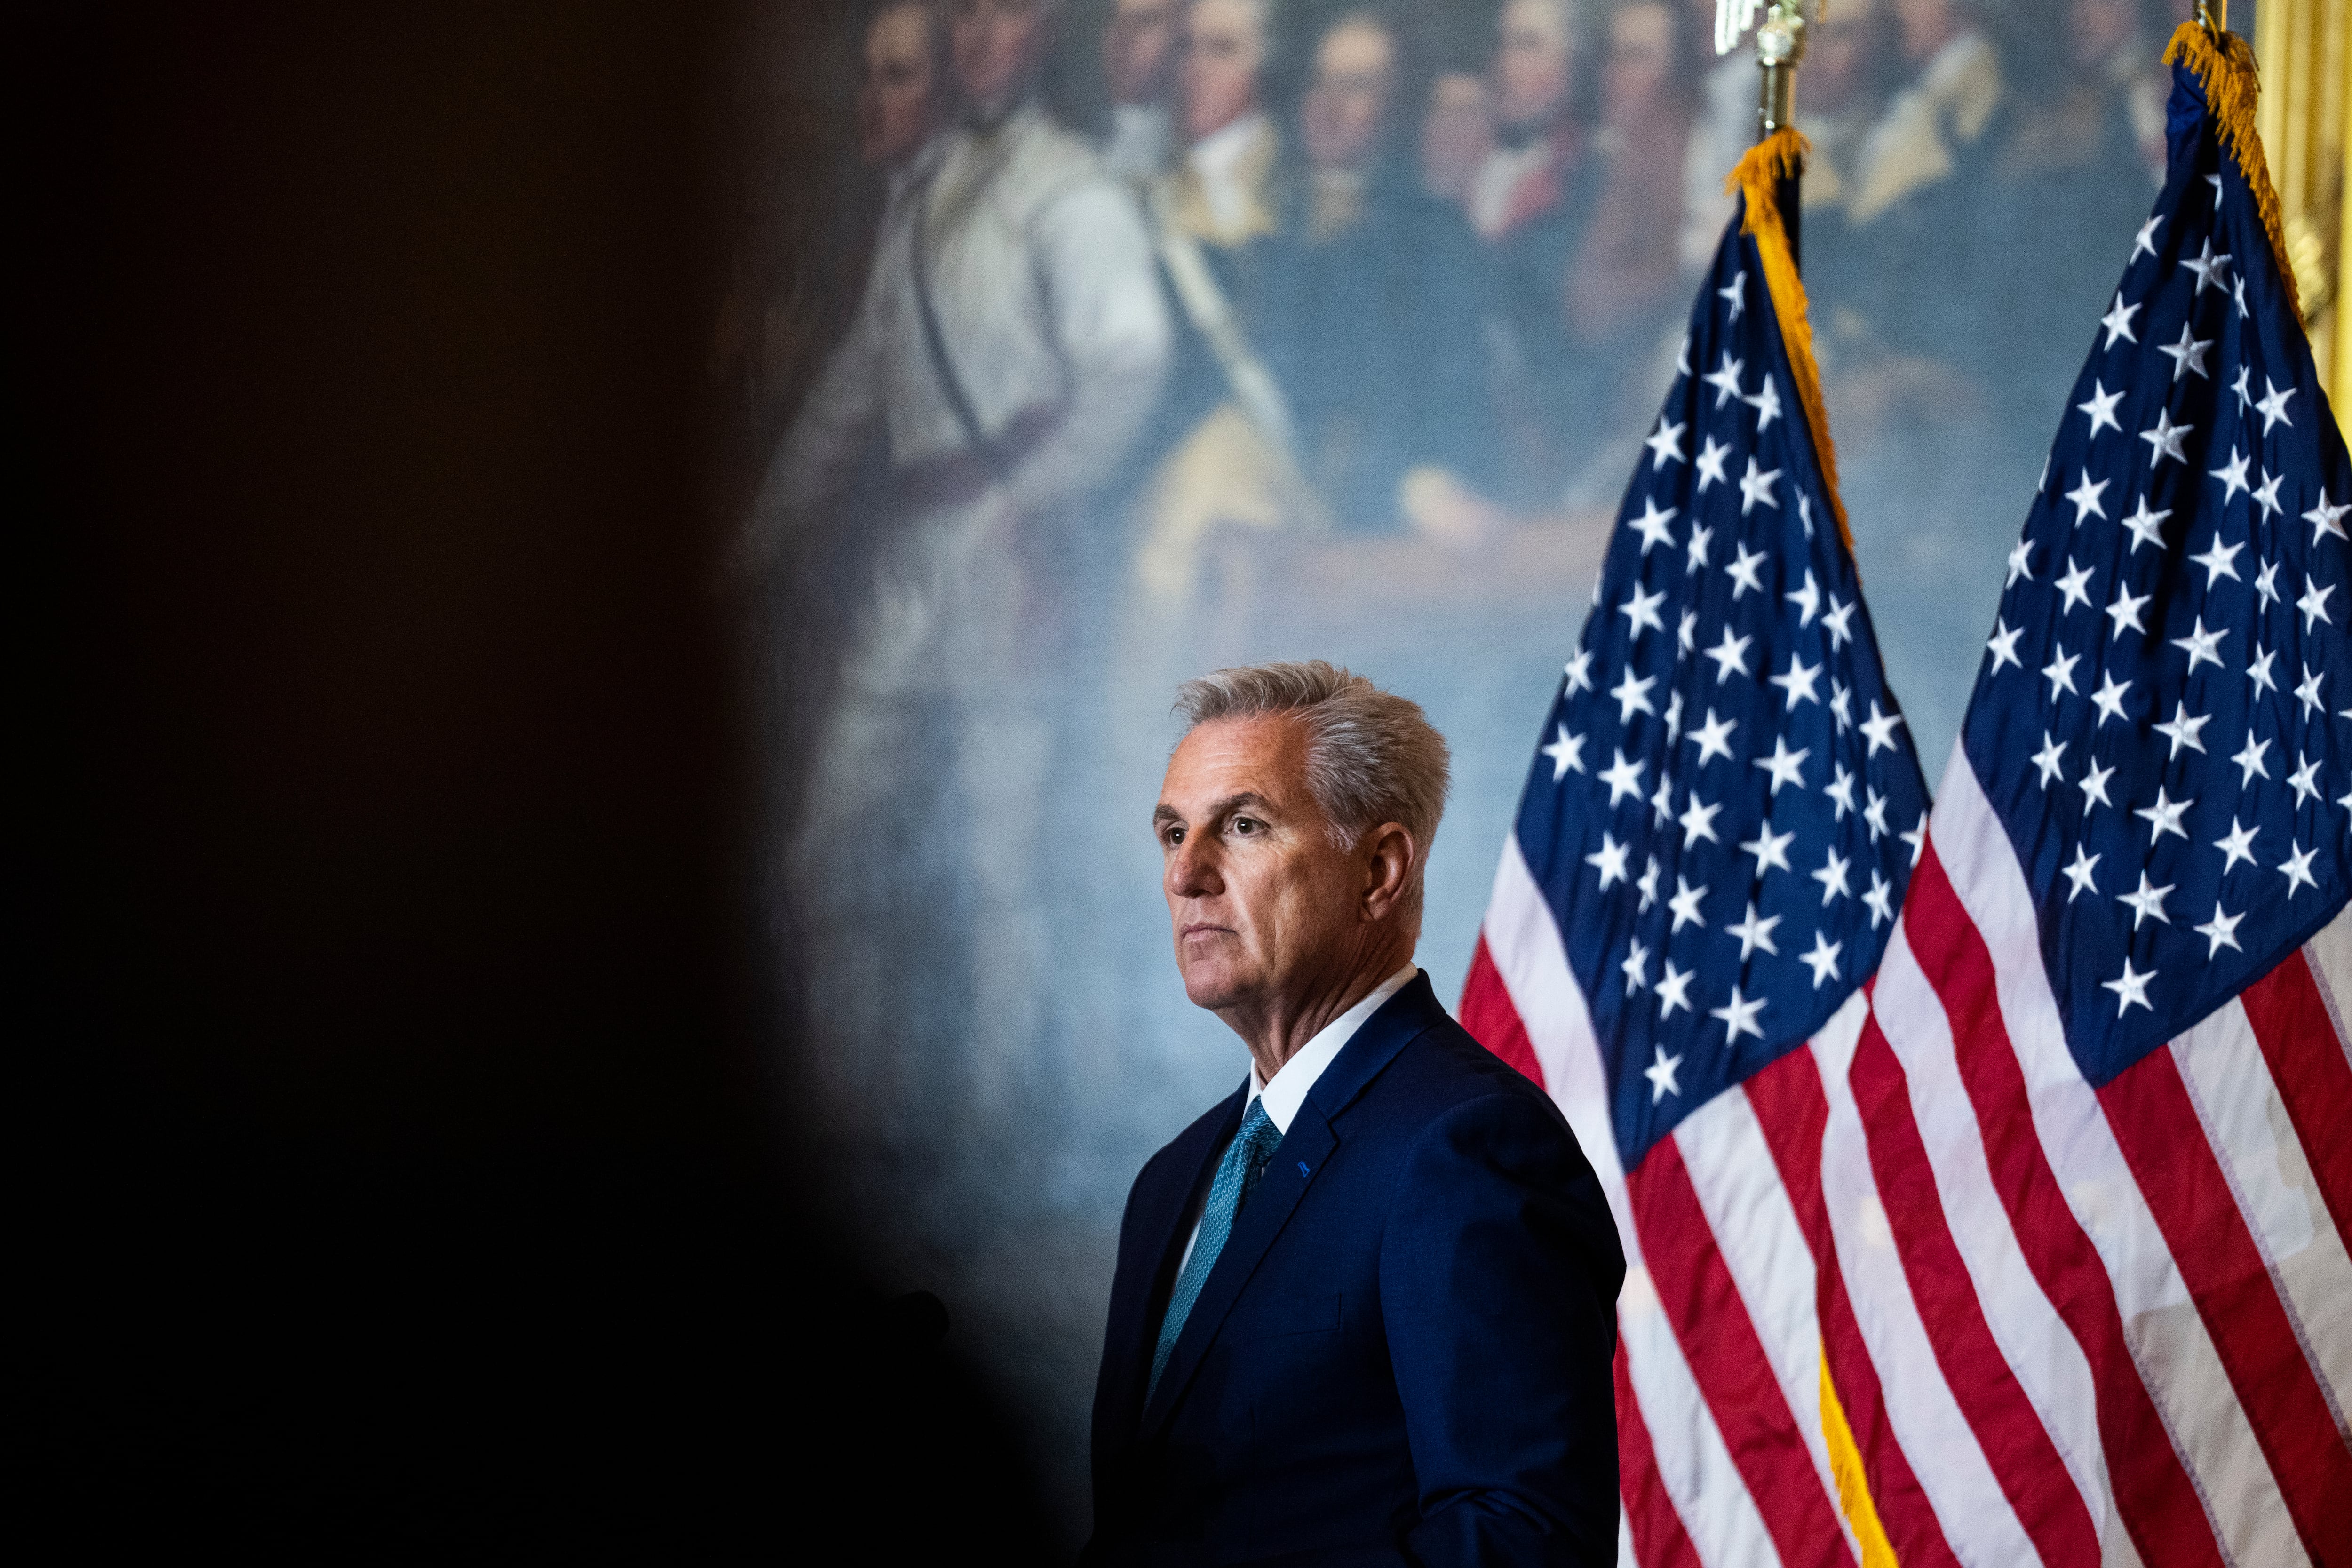 A man in a suit stands in front of two American flags